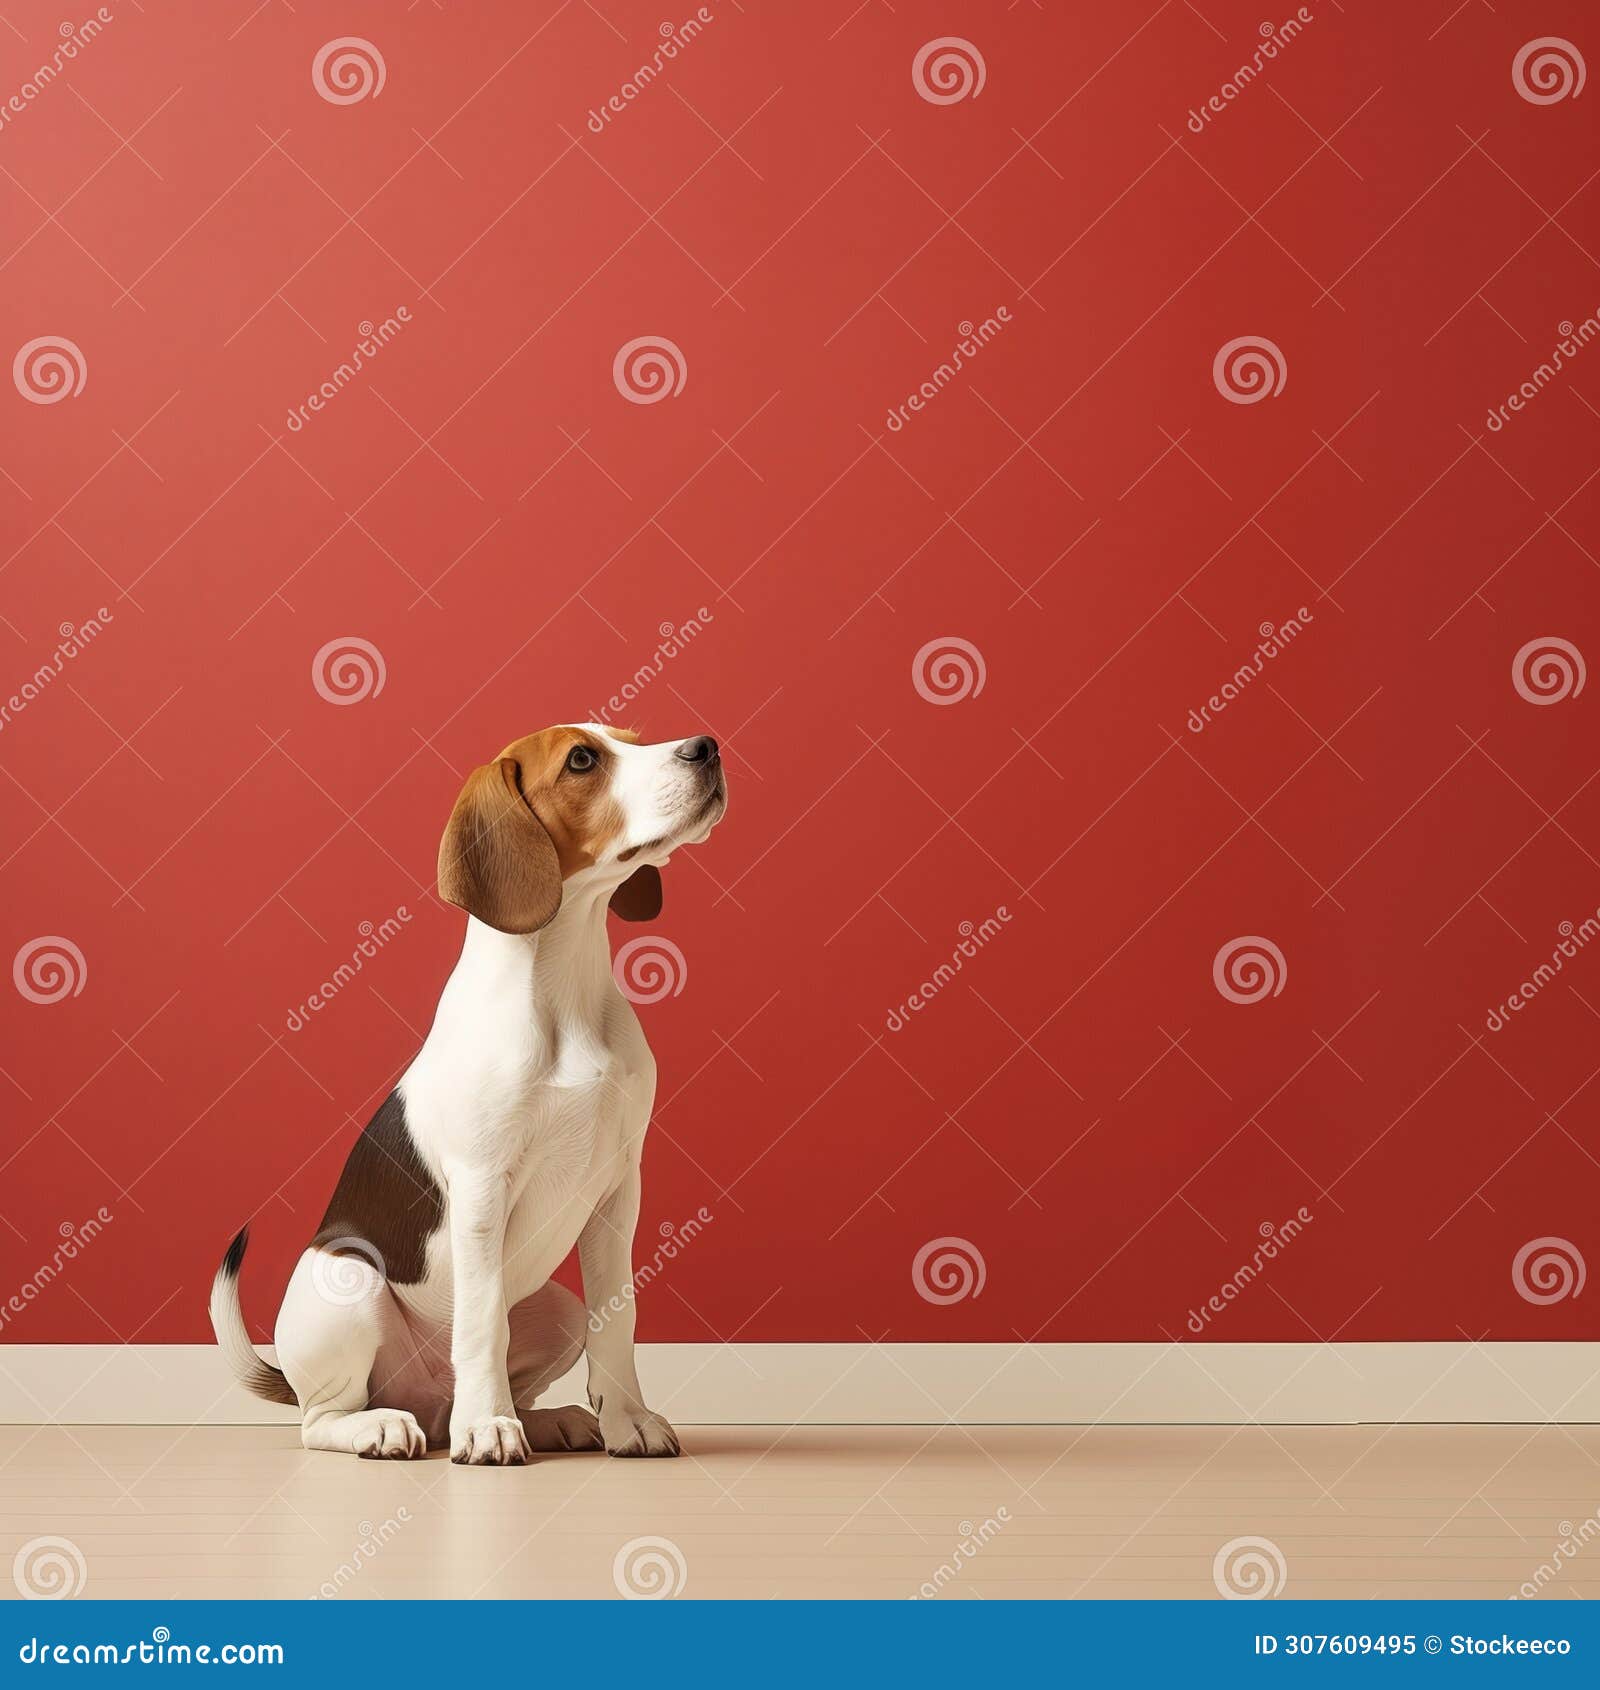 minimalist photography of a cute beagle in spectacular 8k resolution